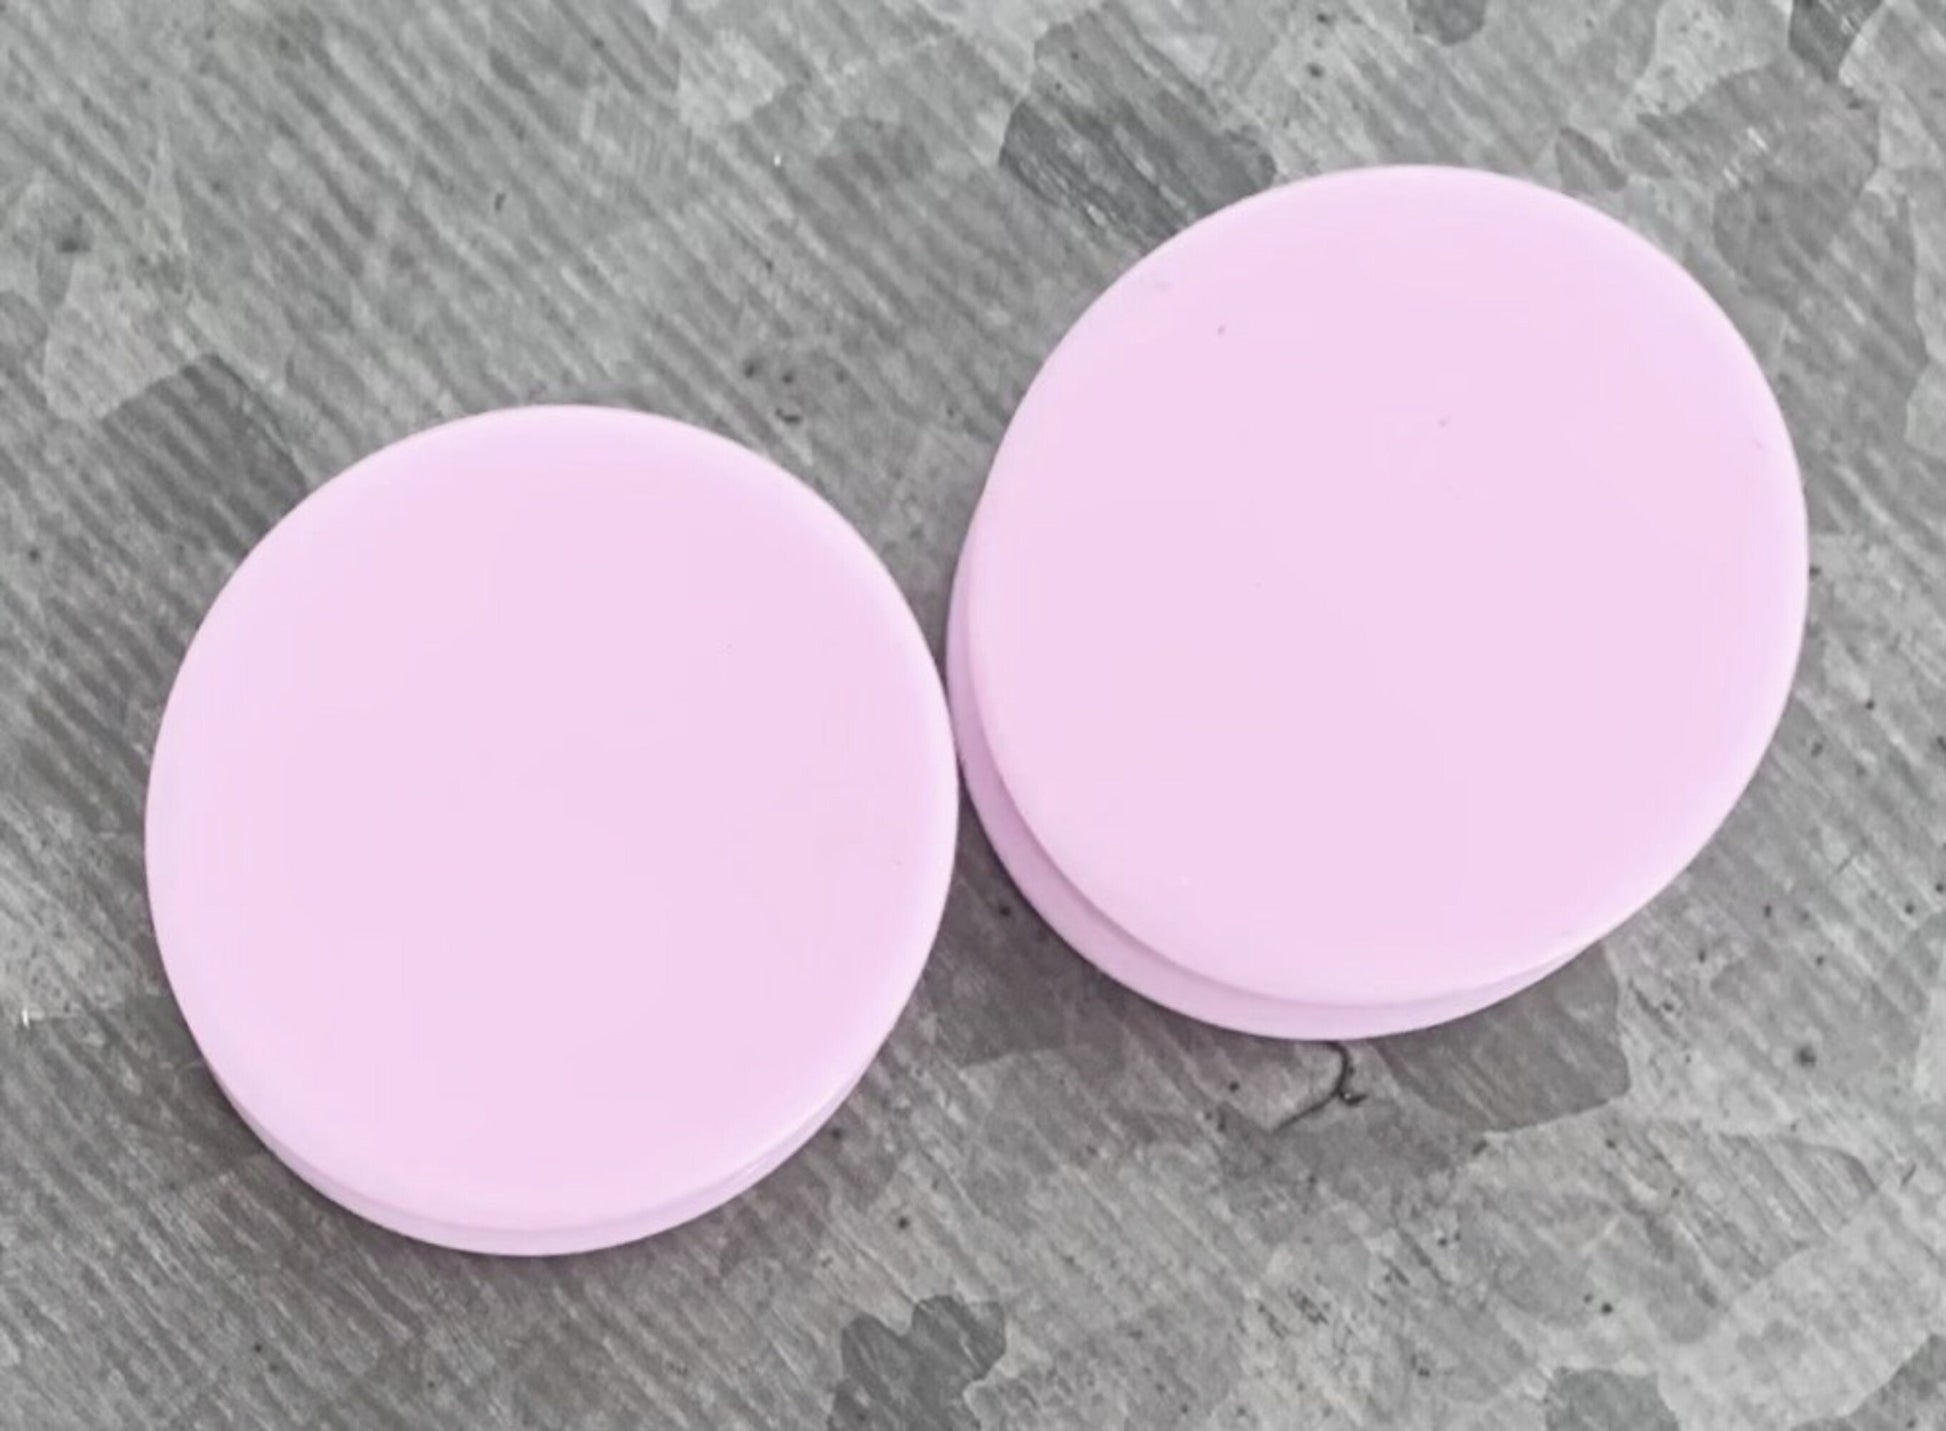 PAIR of Beautiful Lavender Solid Silicone Double Flare Plugs - Gauges 2g (6mm) up to 1" (25mm) available!